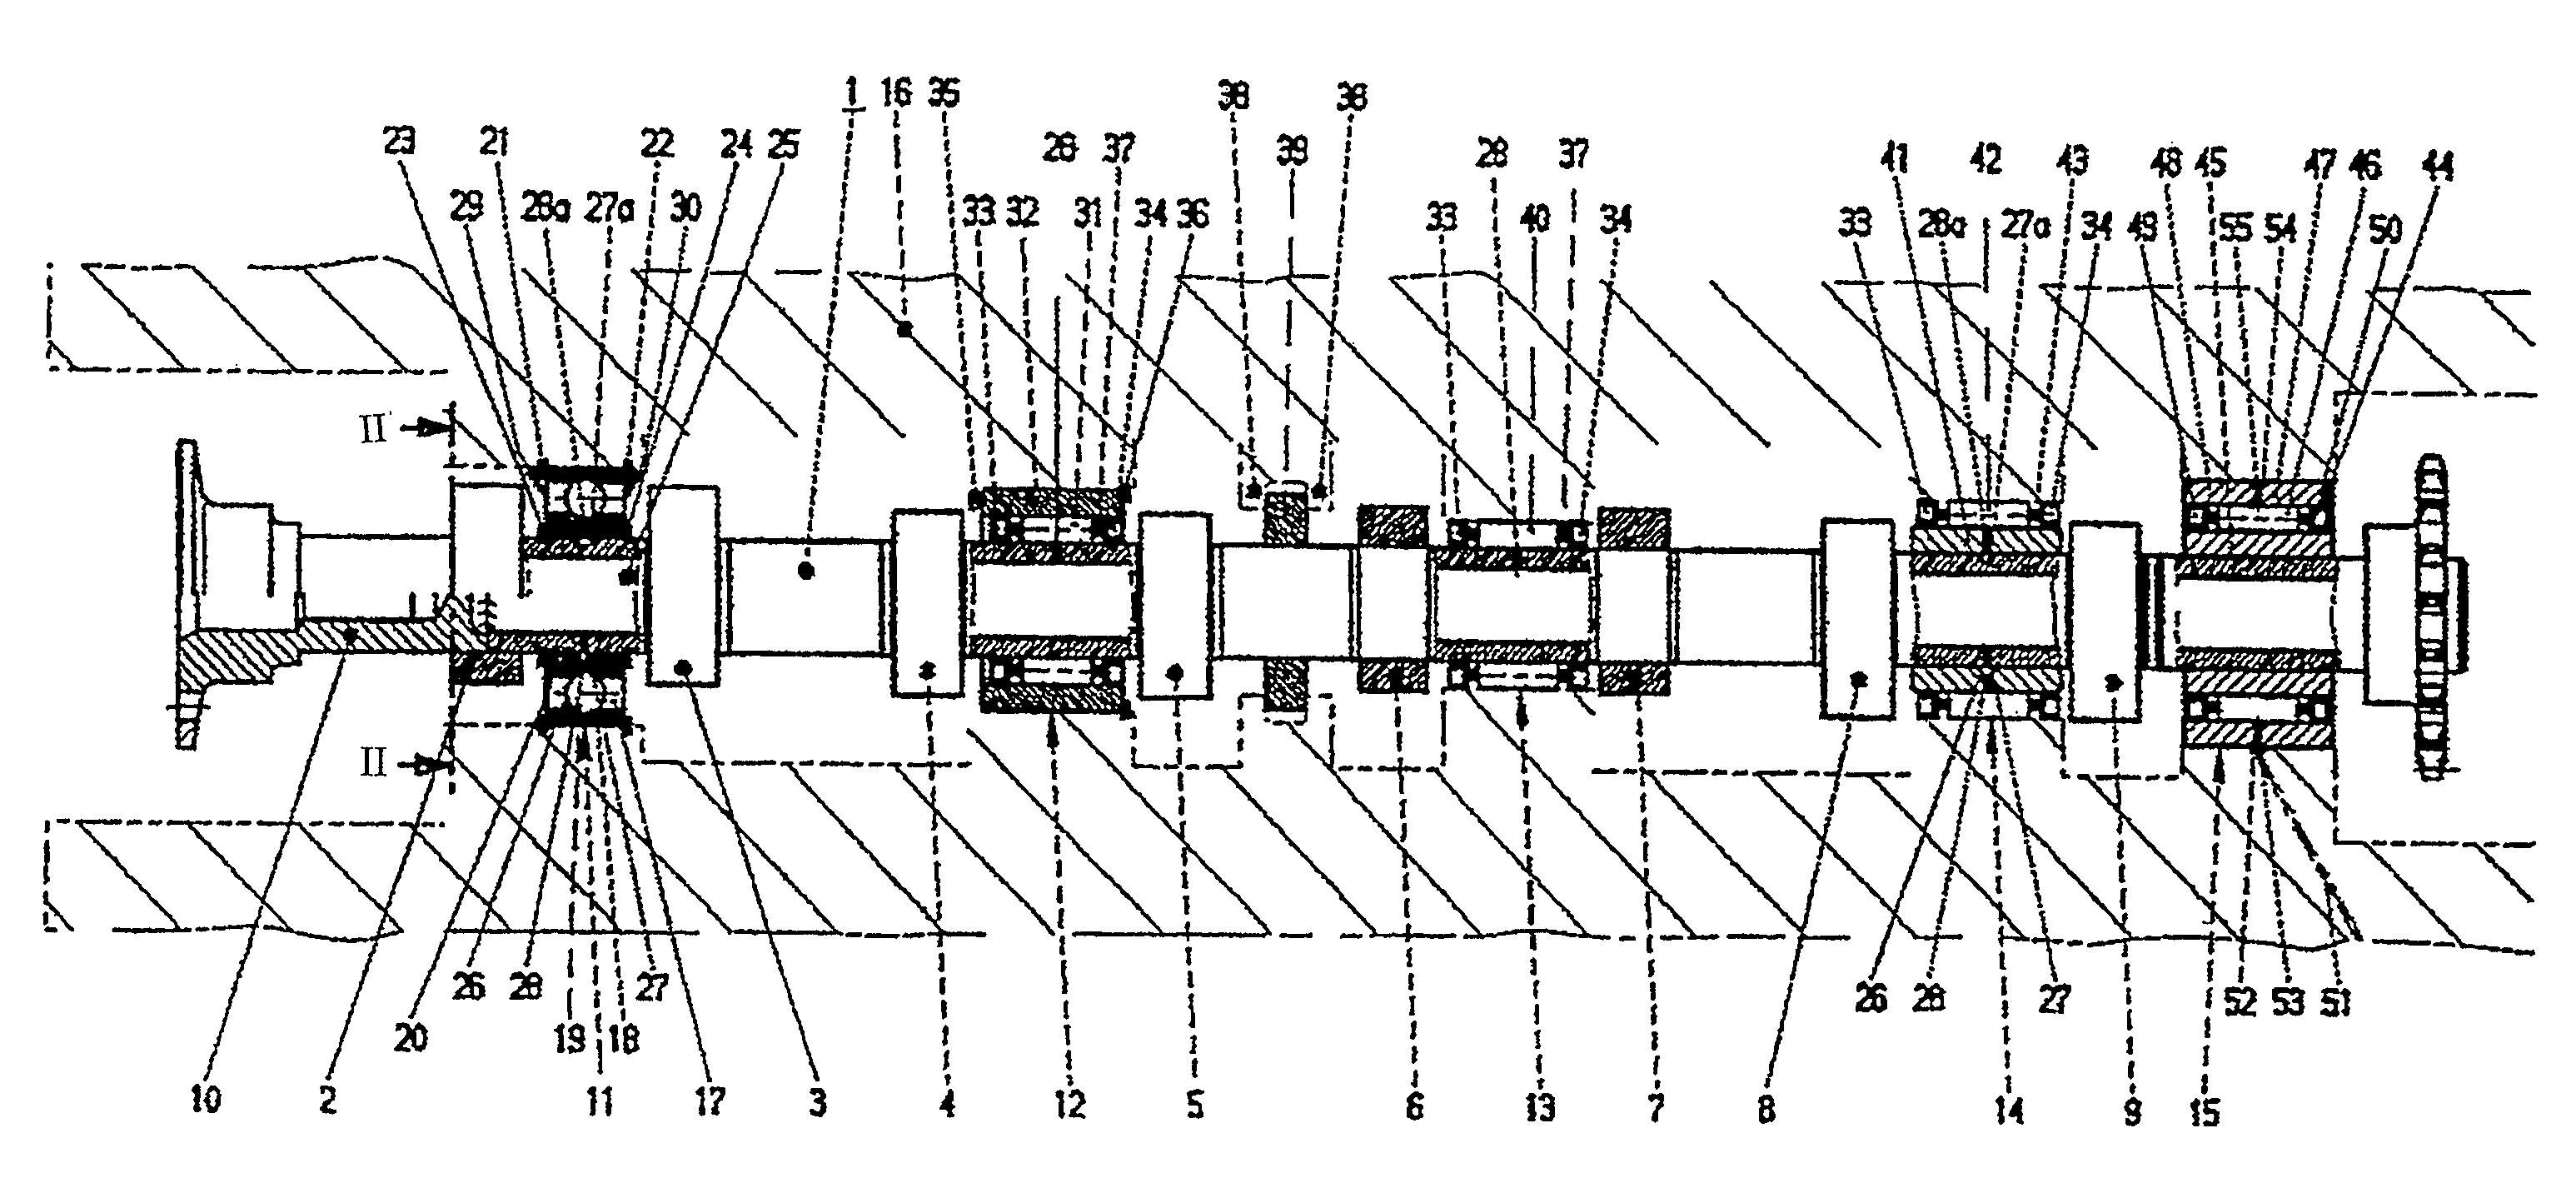 Shaft with functional bodies such as camshafts for internal combustion engines, method of producing them and engines equipped therewith